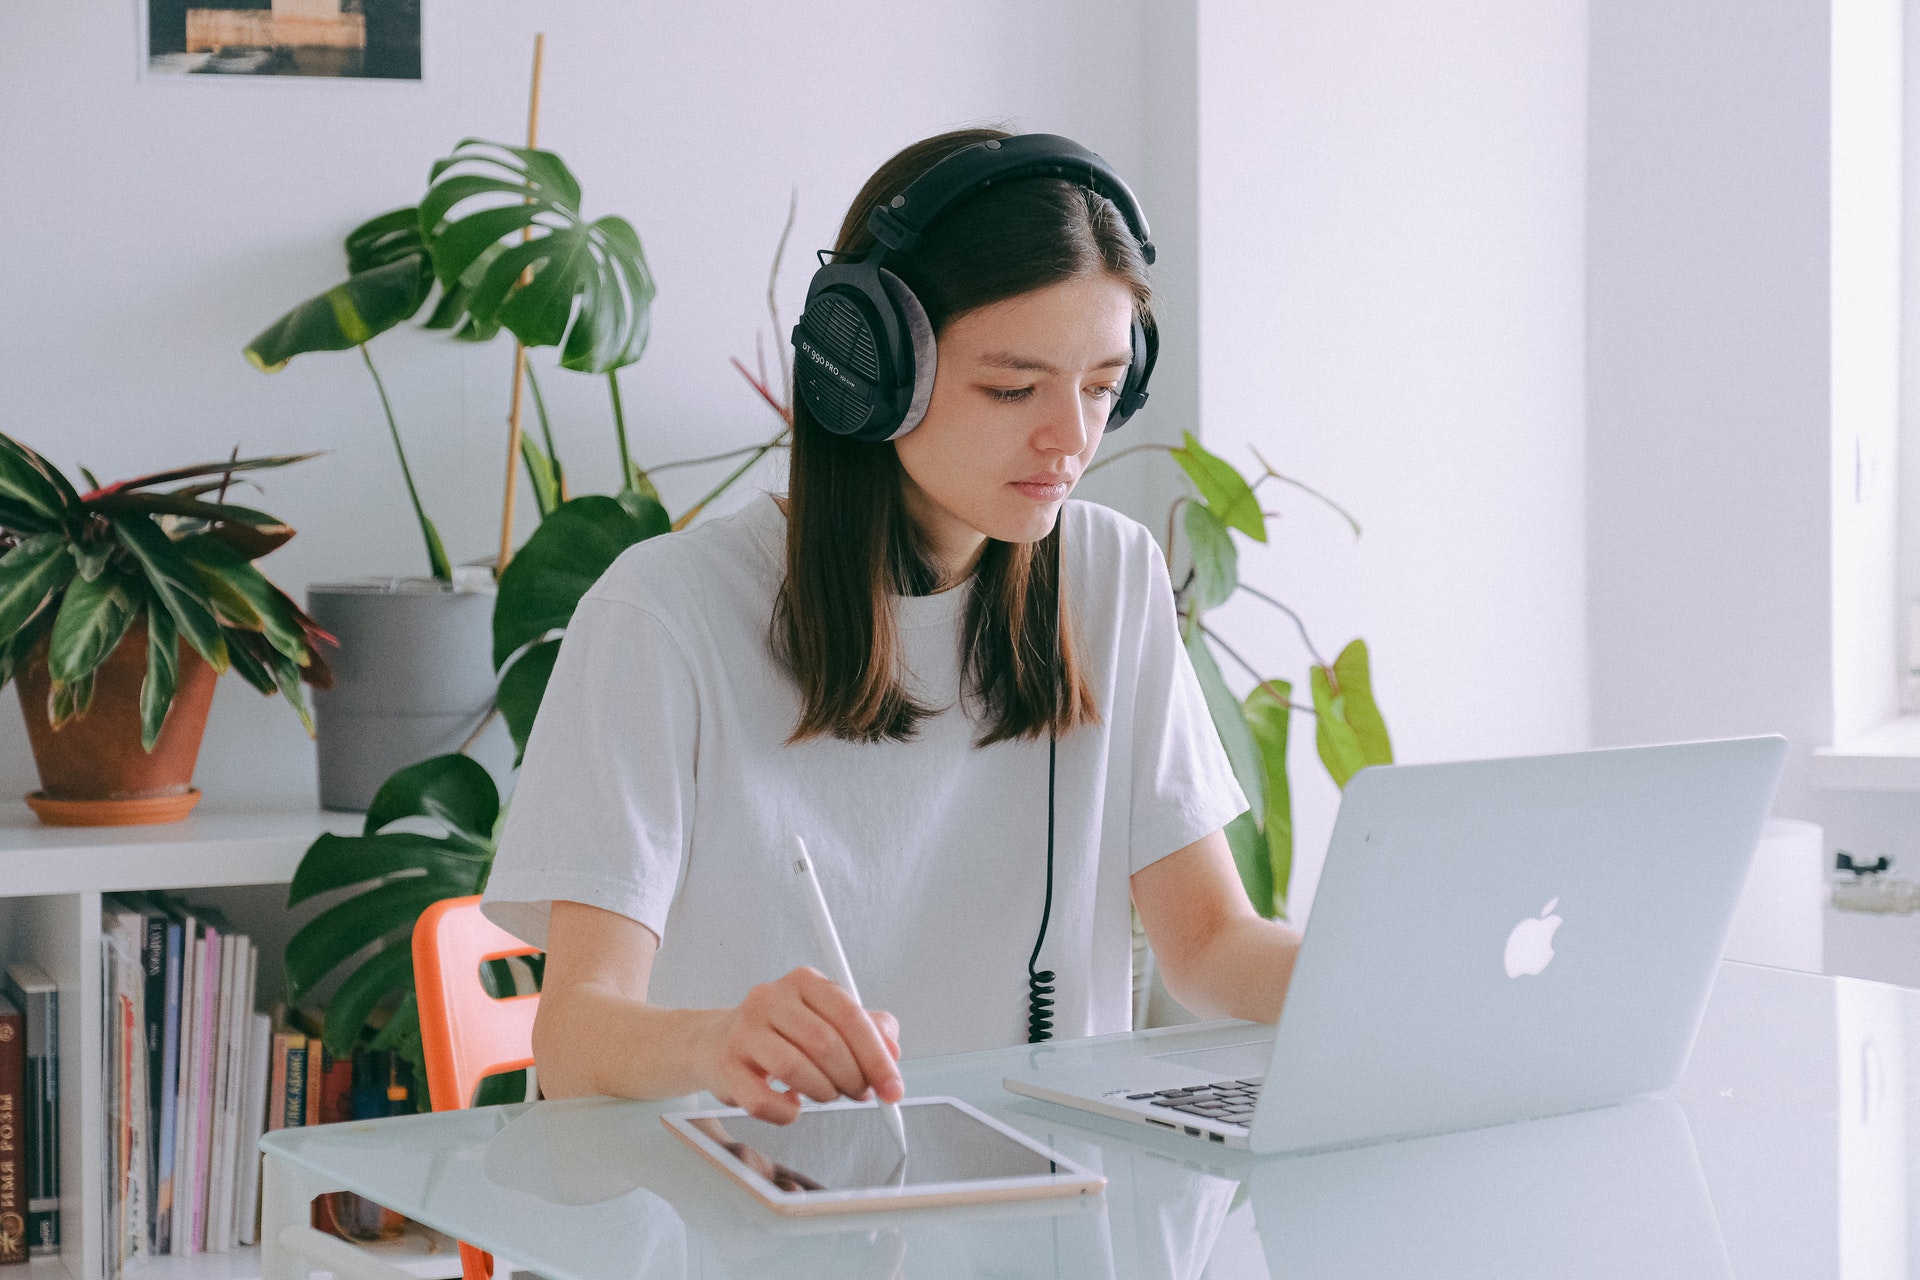 8 Spotify Playlists for Programming and Focus for 2022